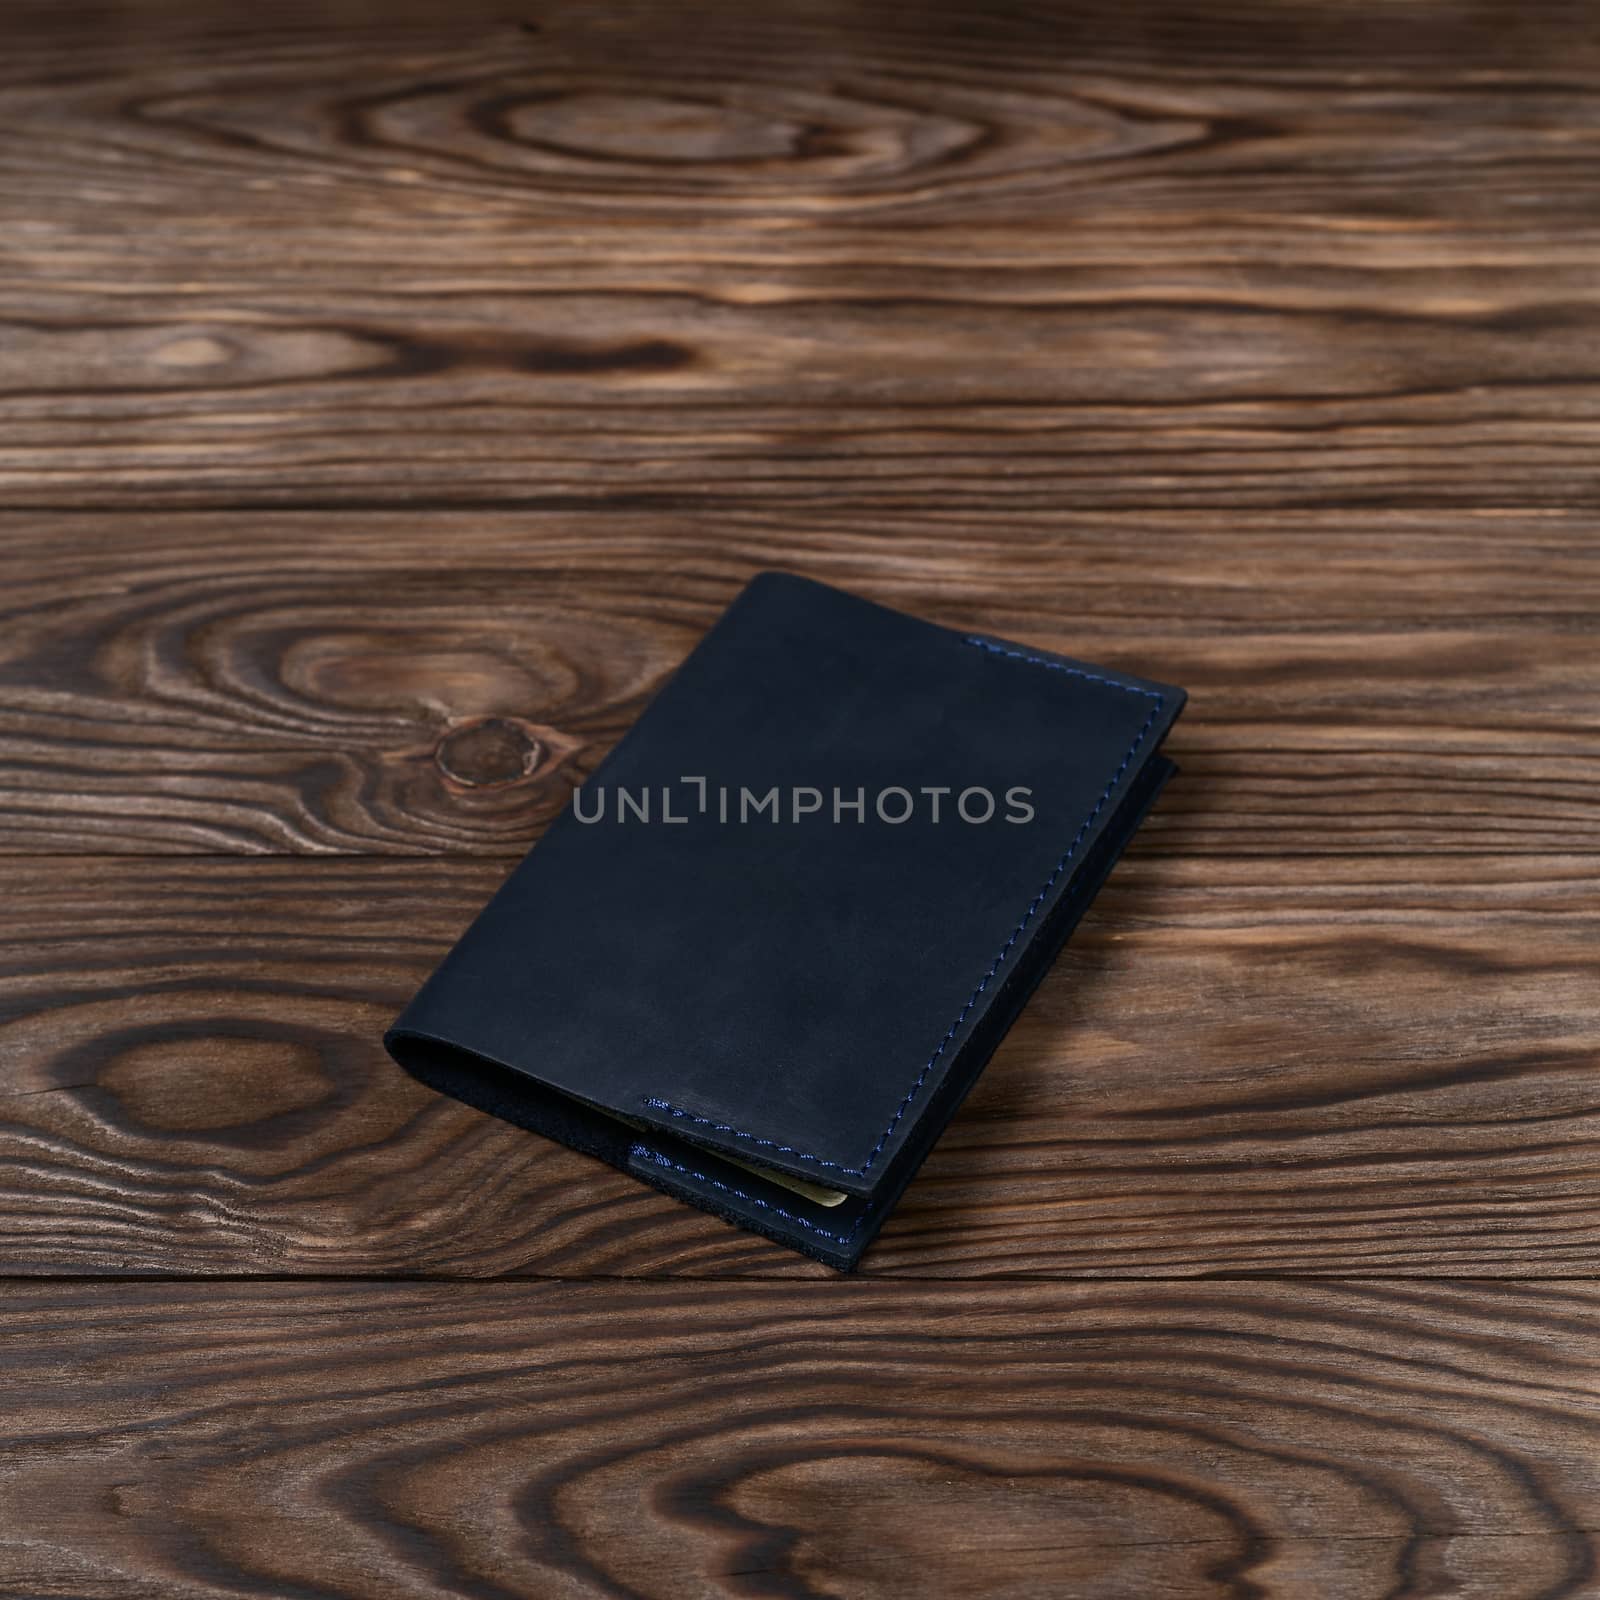 Blue color handmade leather passport cover on wooden textured background. Businessman`s accessory.